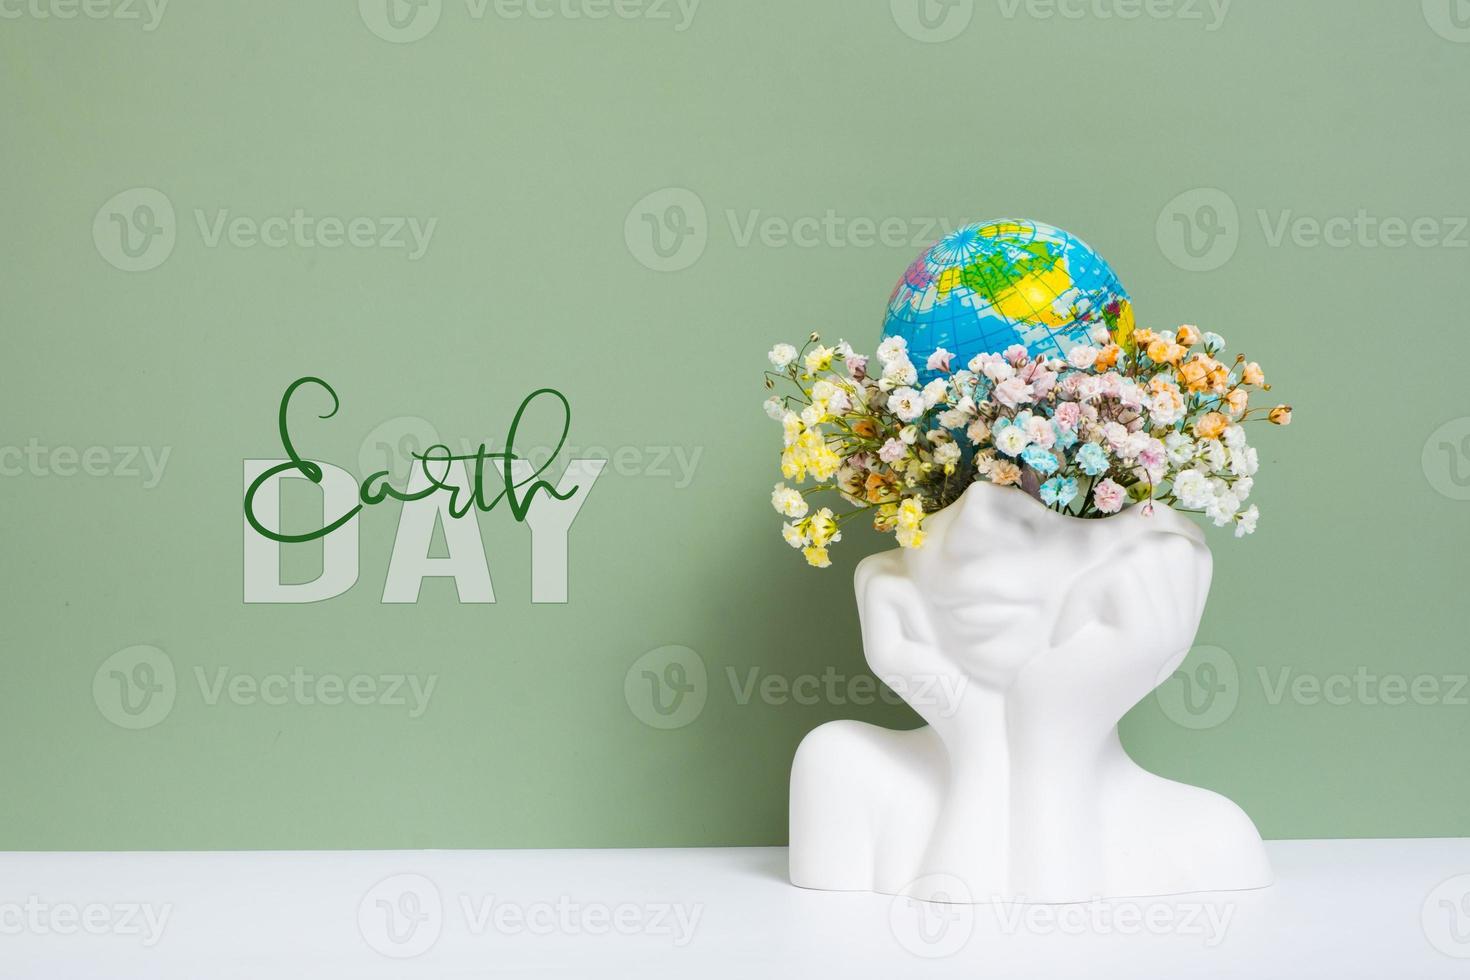 Creative plaster vase head-shape with flowers and world globe. Save the planet, Earth day concept photo